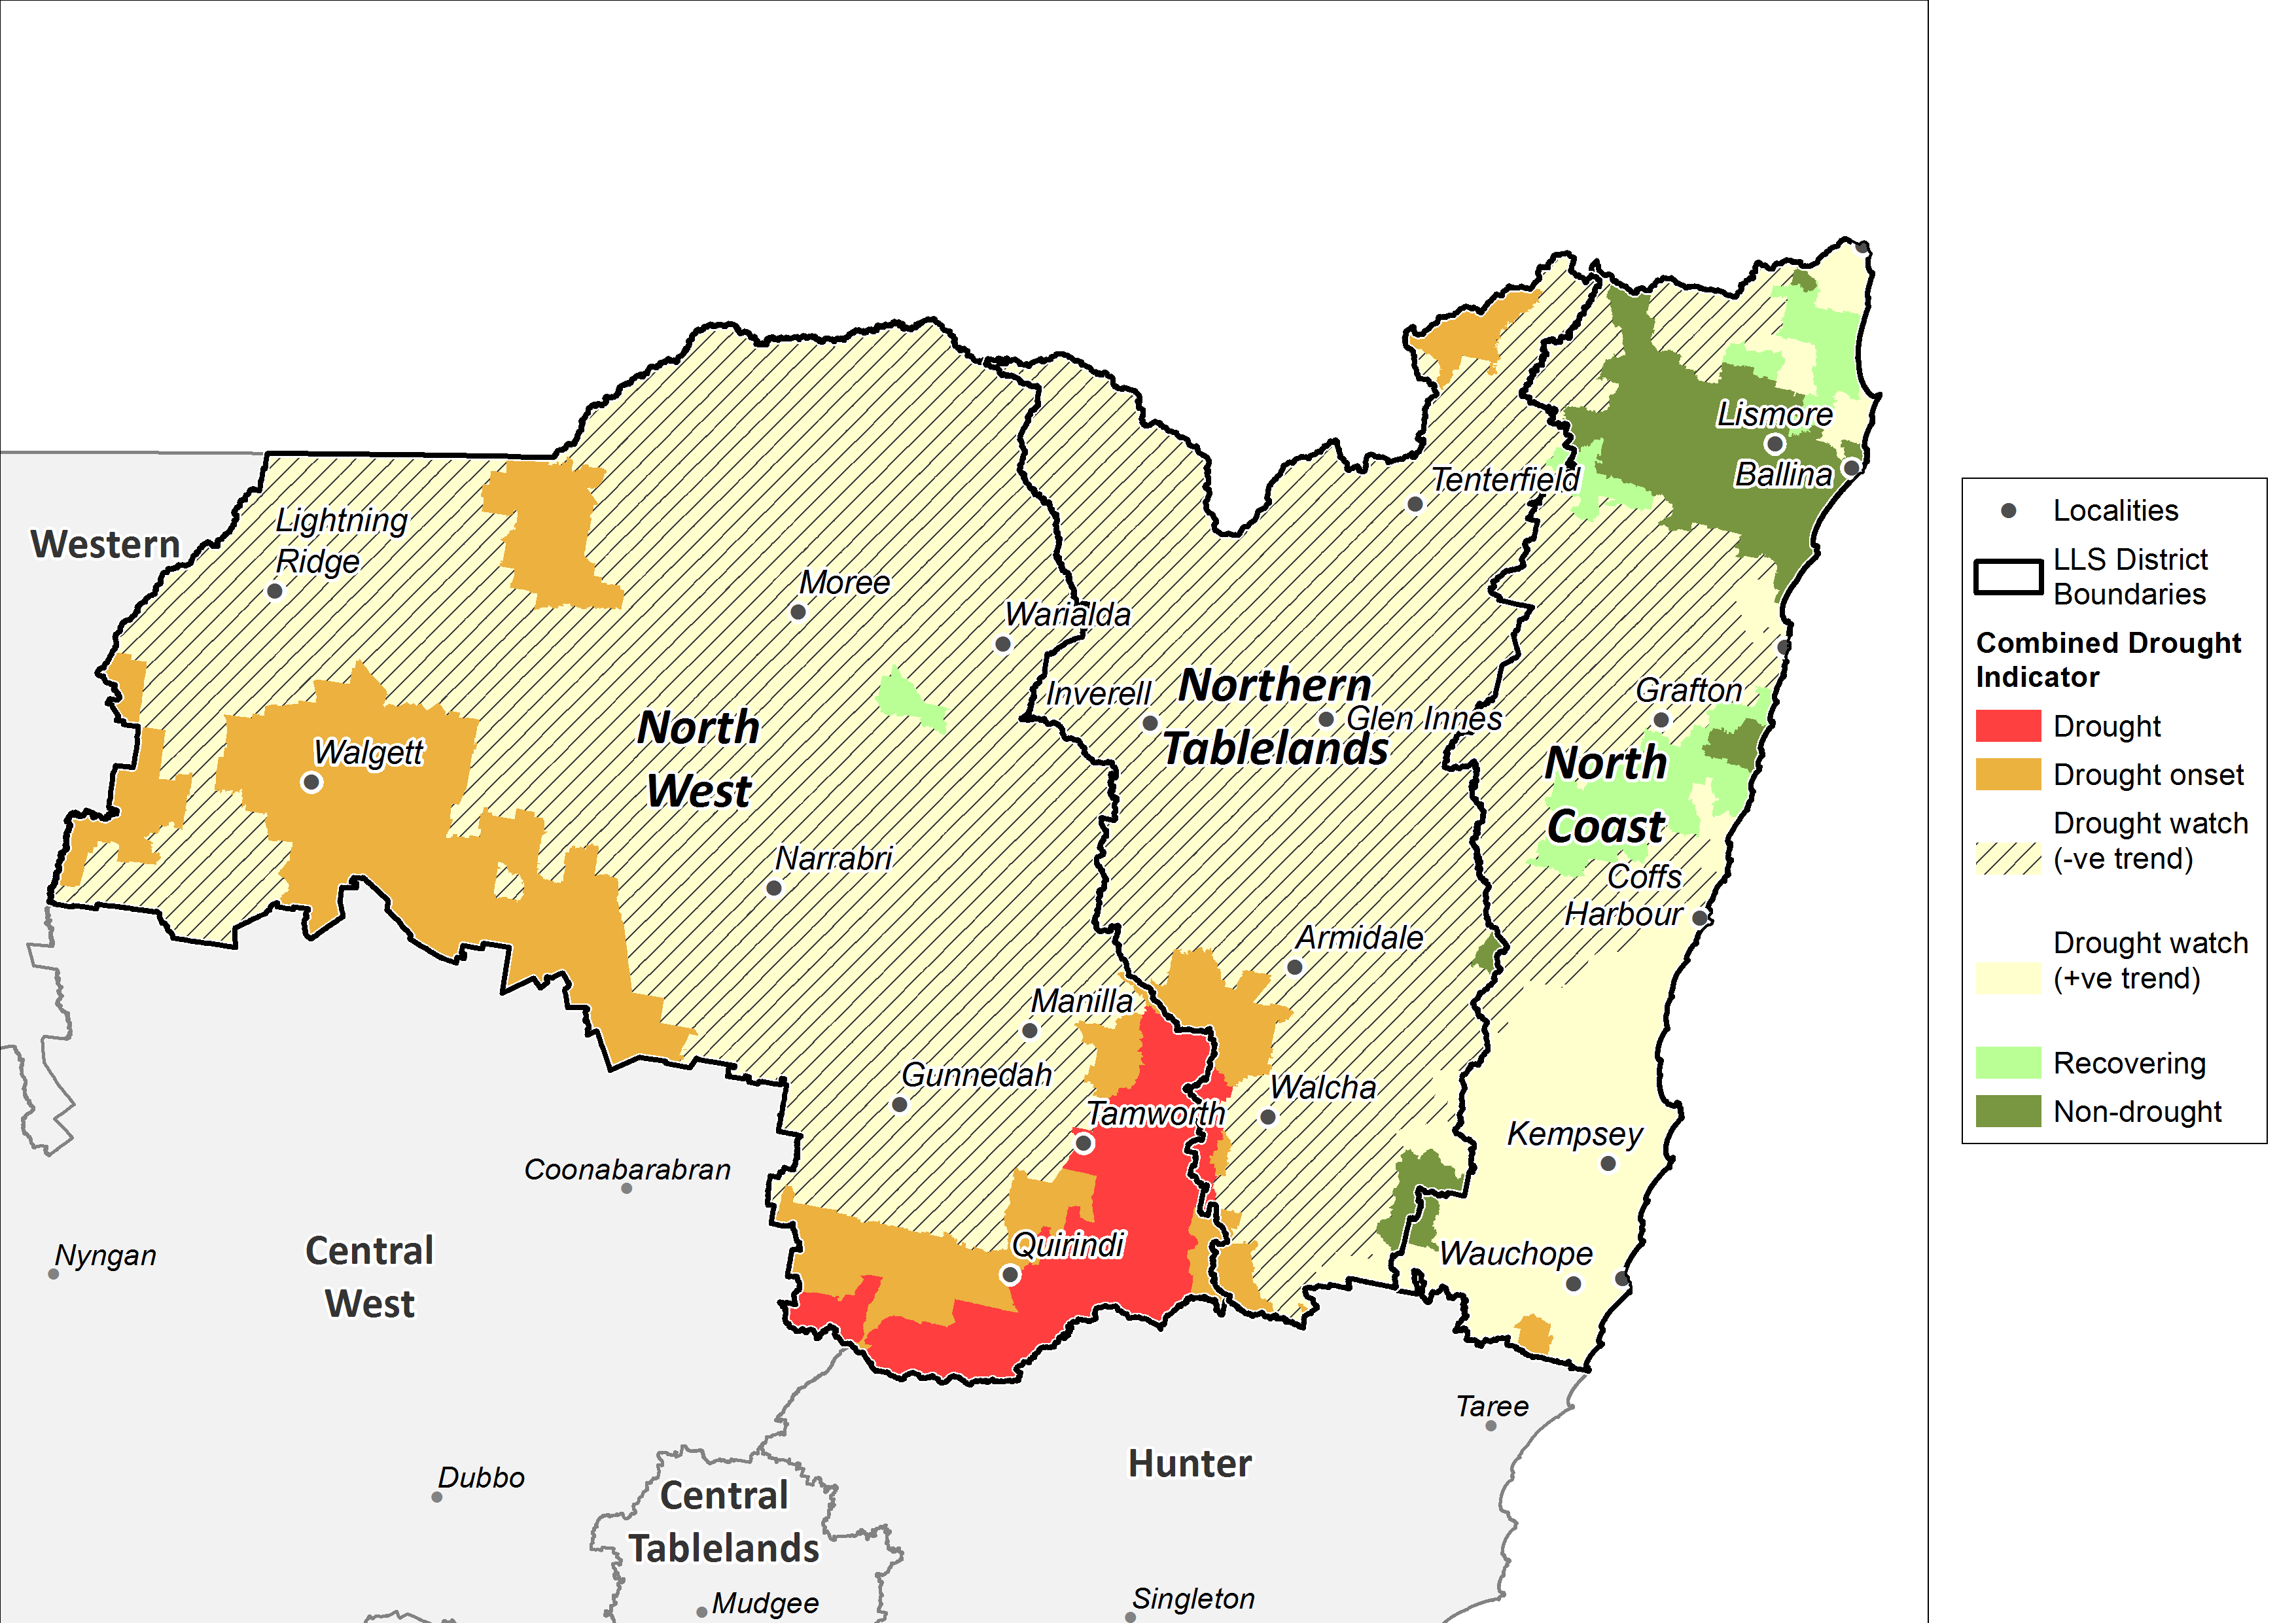 For an accessible explanation of this map contact the author anthony.clark@dpi.nsw.gov.au